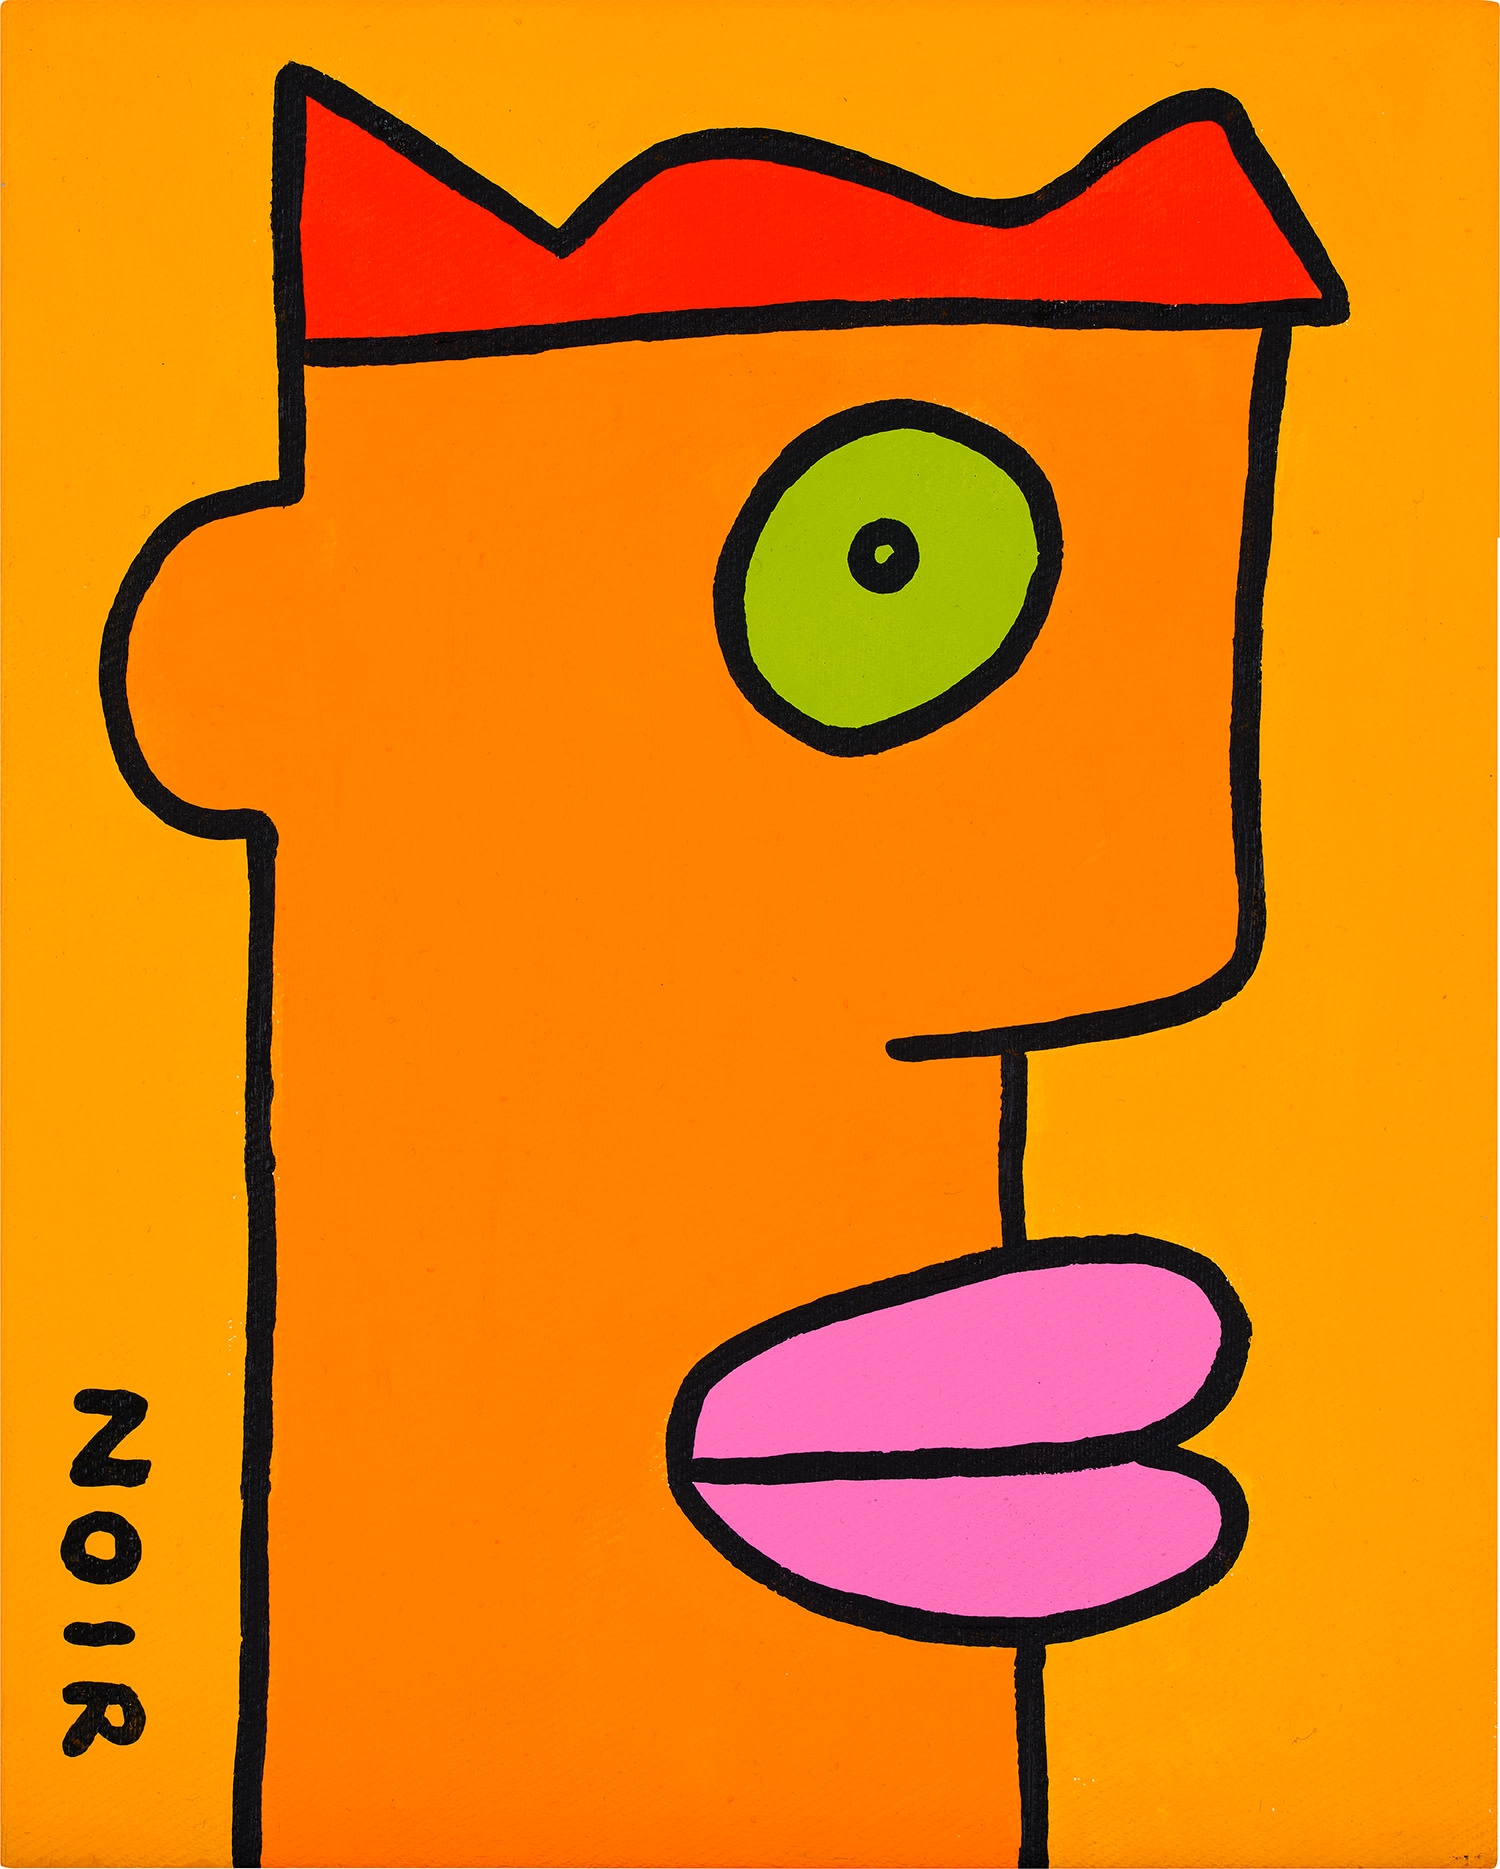 I do not even have a chance to look at the time because I am walking so quickly - Thierry Noir